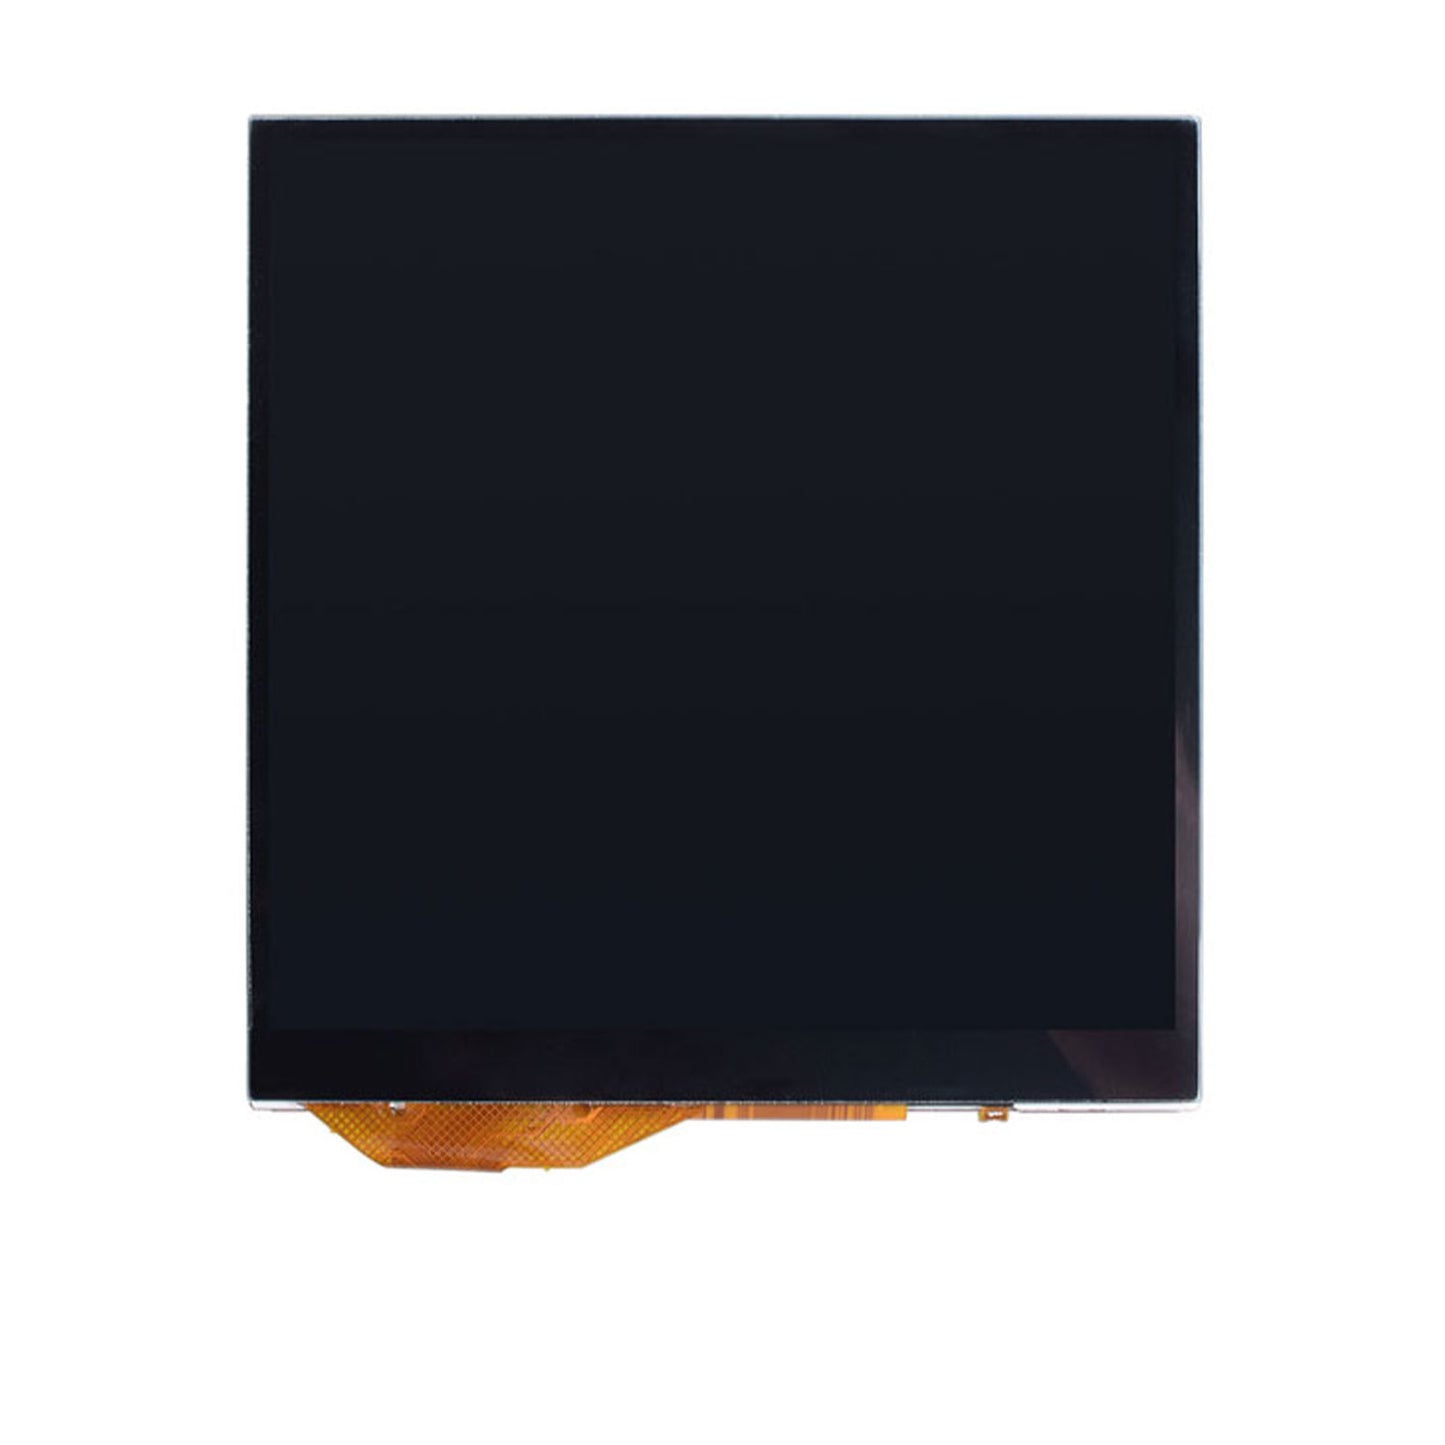 DisplayModule 4.0" IPS 480X480 High Brightness TFT Display Panel With Capacitive Touch –RGB